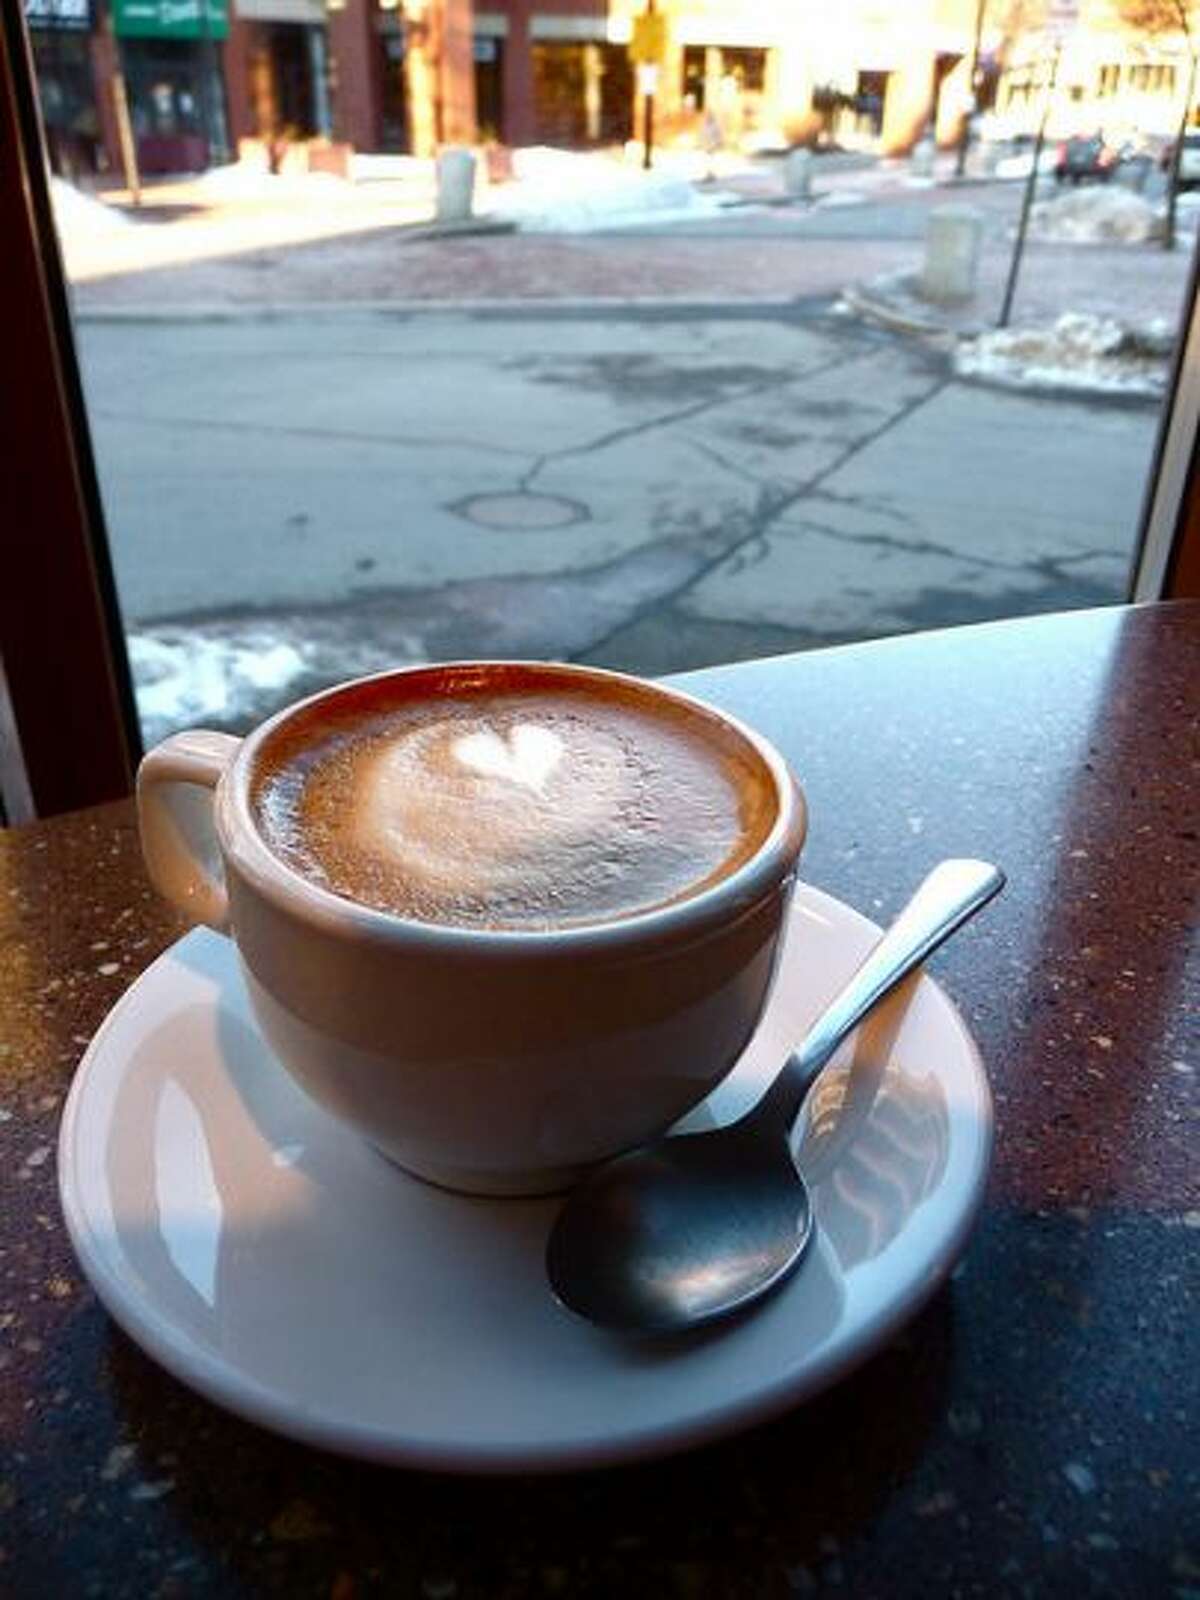 8. Portland, Maine - Good coffee helps start cold days here, and Travel + Leisure says many locals swear by the café in the L.L. Bean flagship store.(Photo: Justin Henry, Creative Commons Flickr).